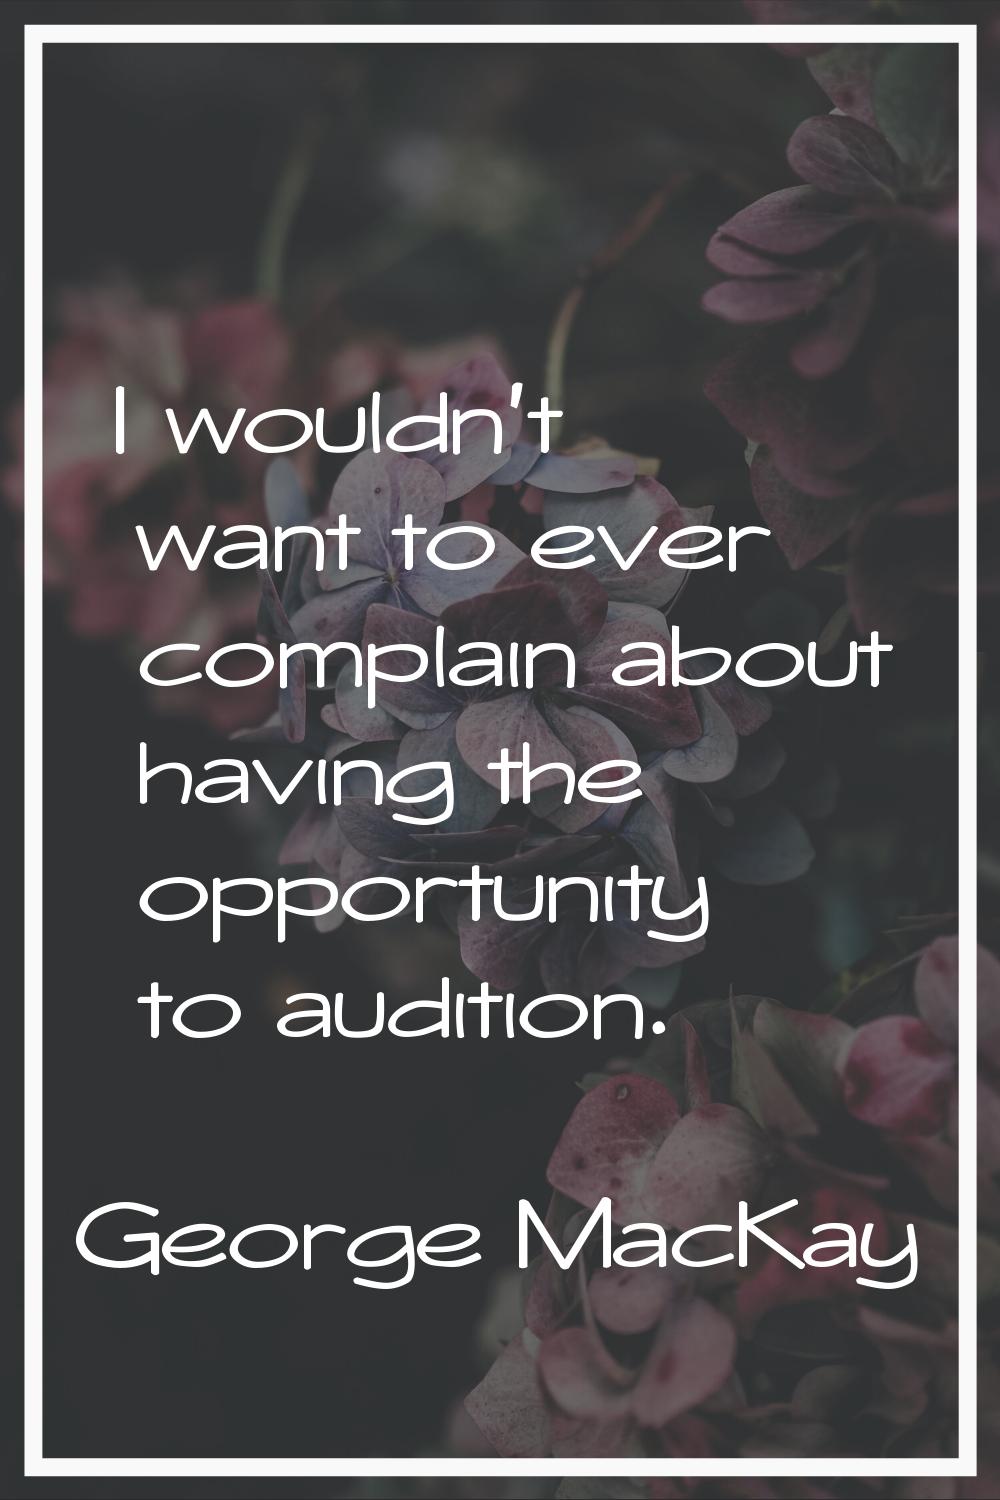 I wouldn't want to ever complain about having the opportunity to audition.